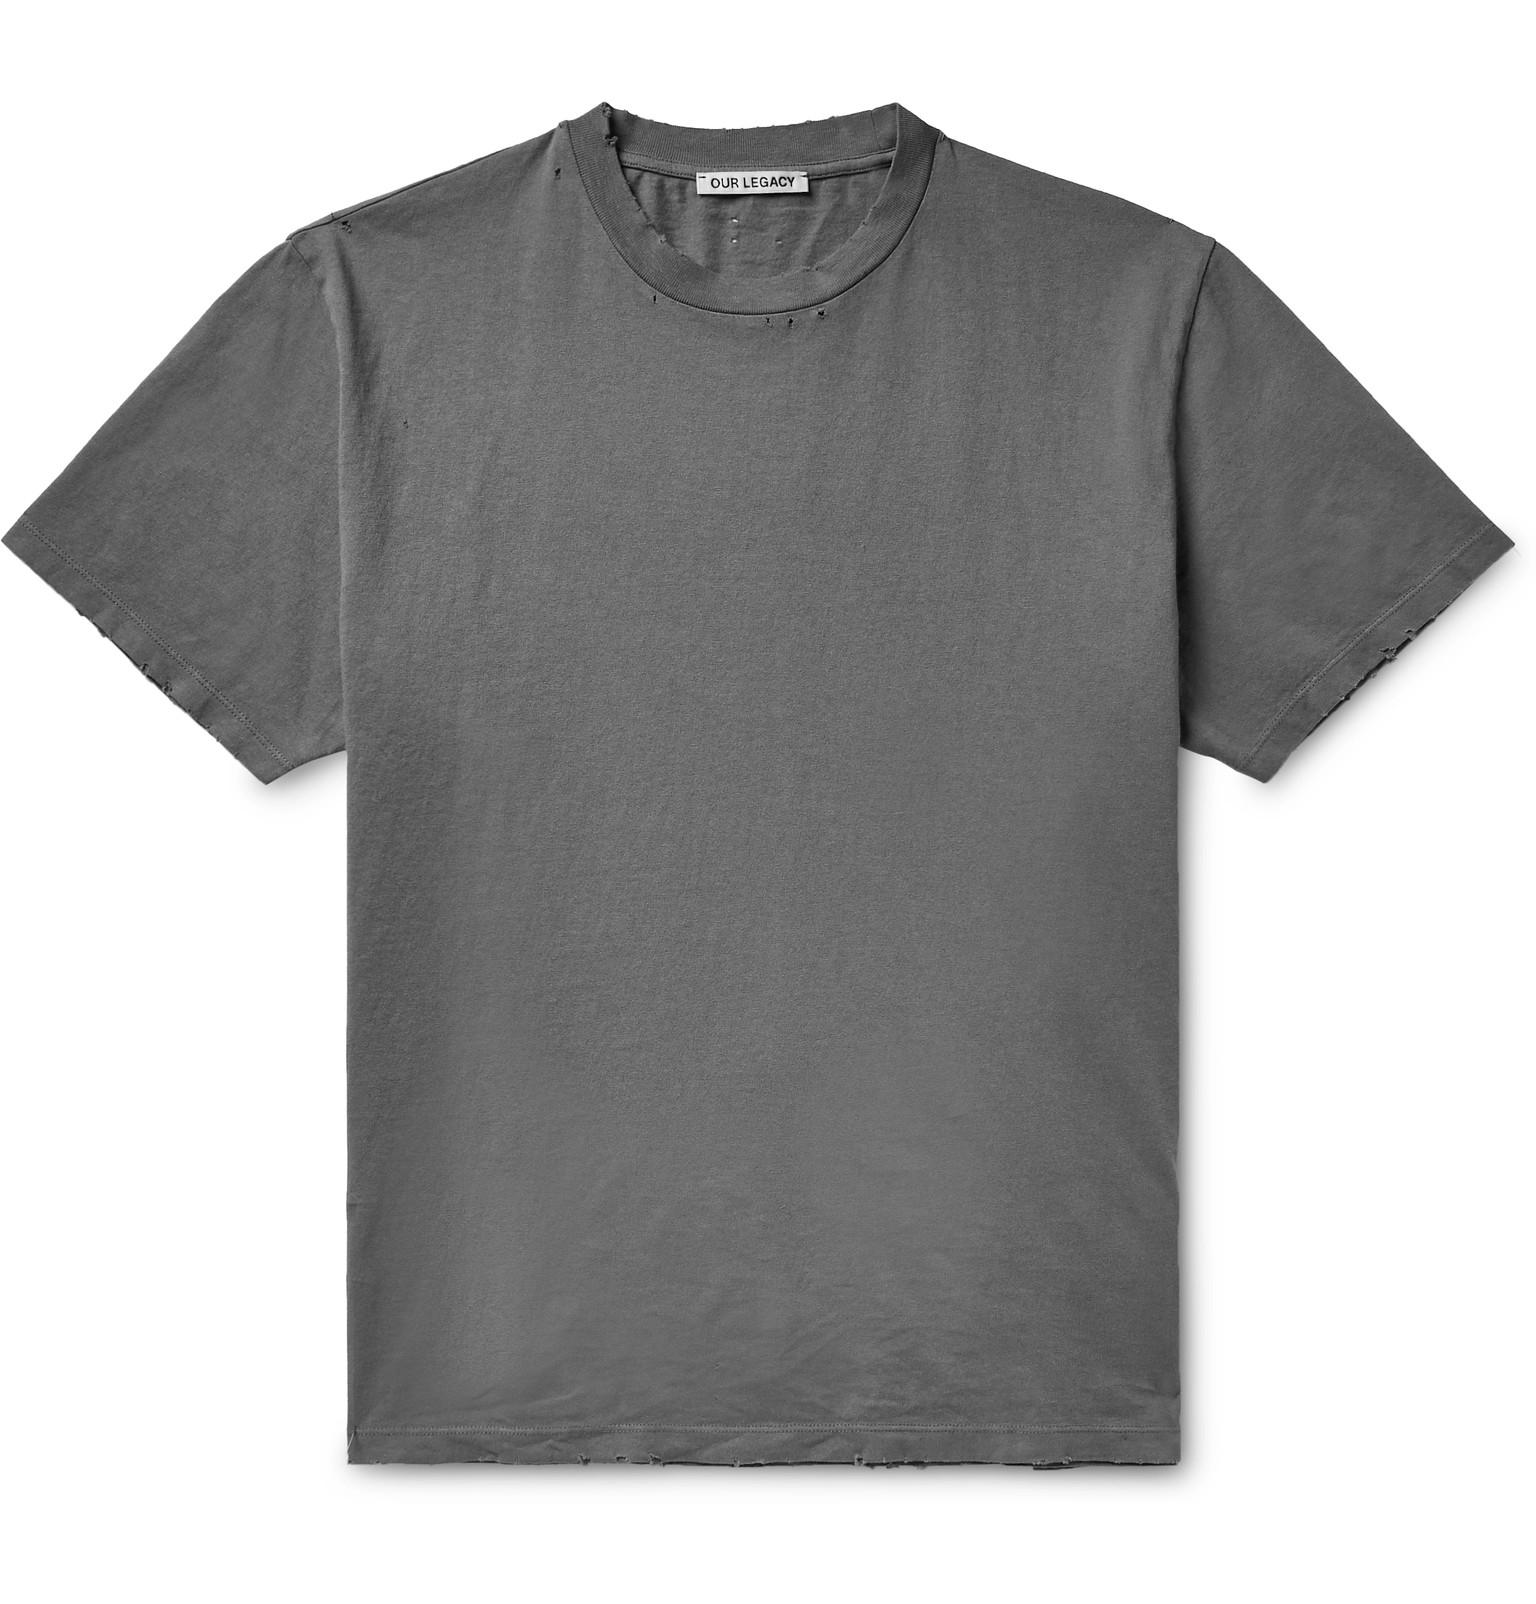 Lyst - Our Legacy Distressed Cotton-jersey T-shirt in Gray for Men ...